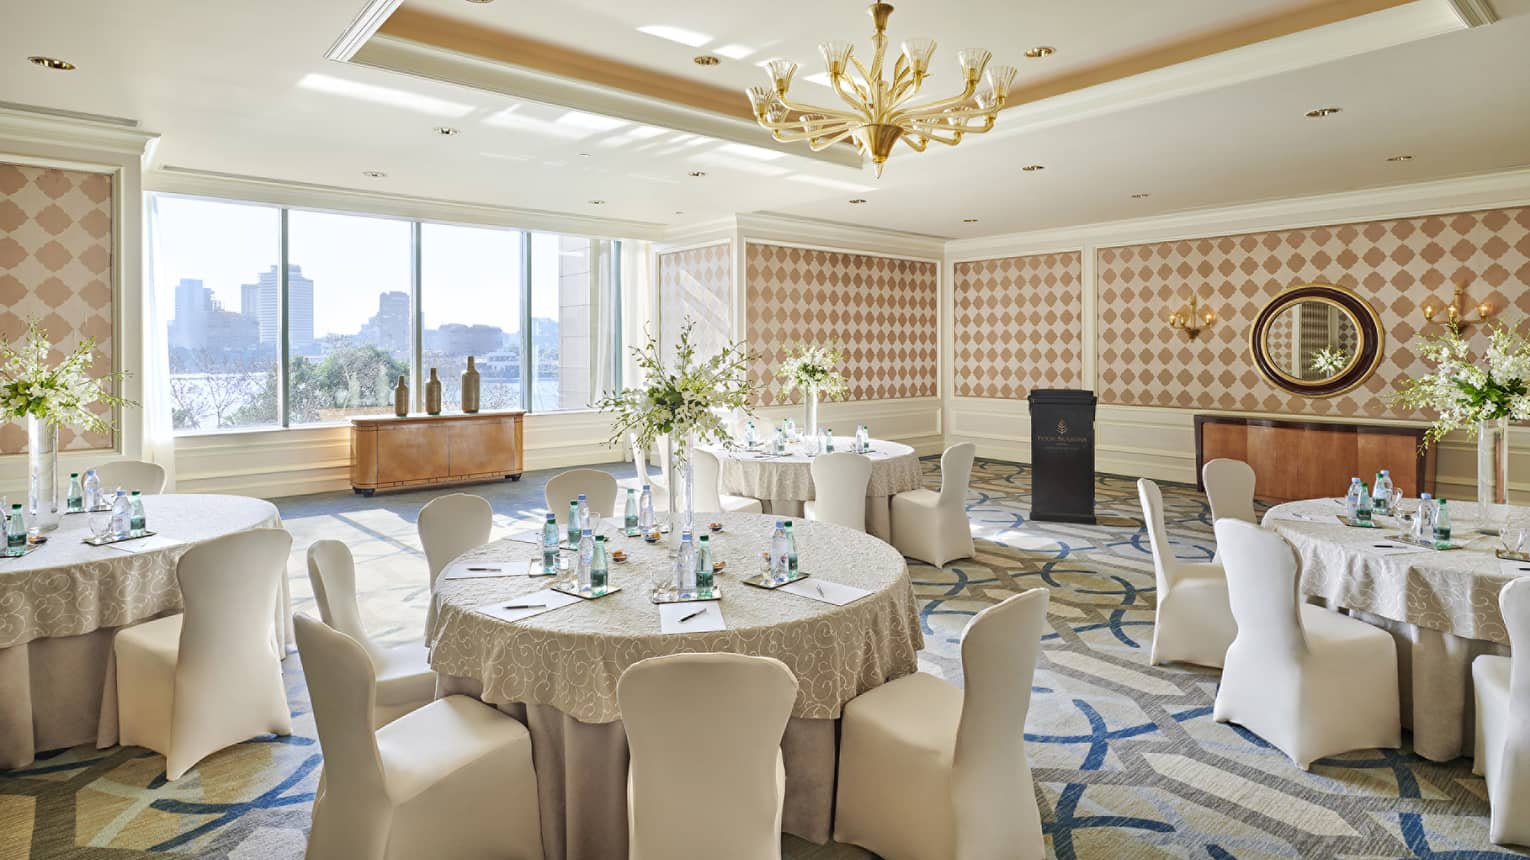 Round banquet tables, linen-covered chairs in sunny Kasr El Nile meeting room